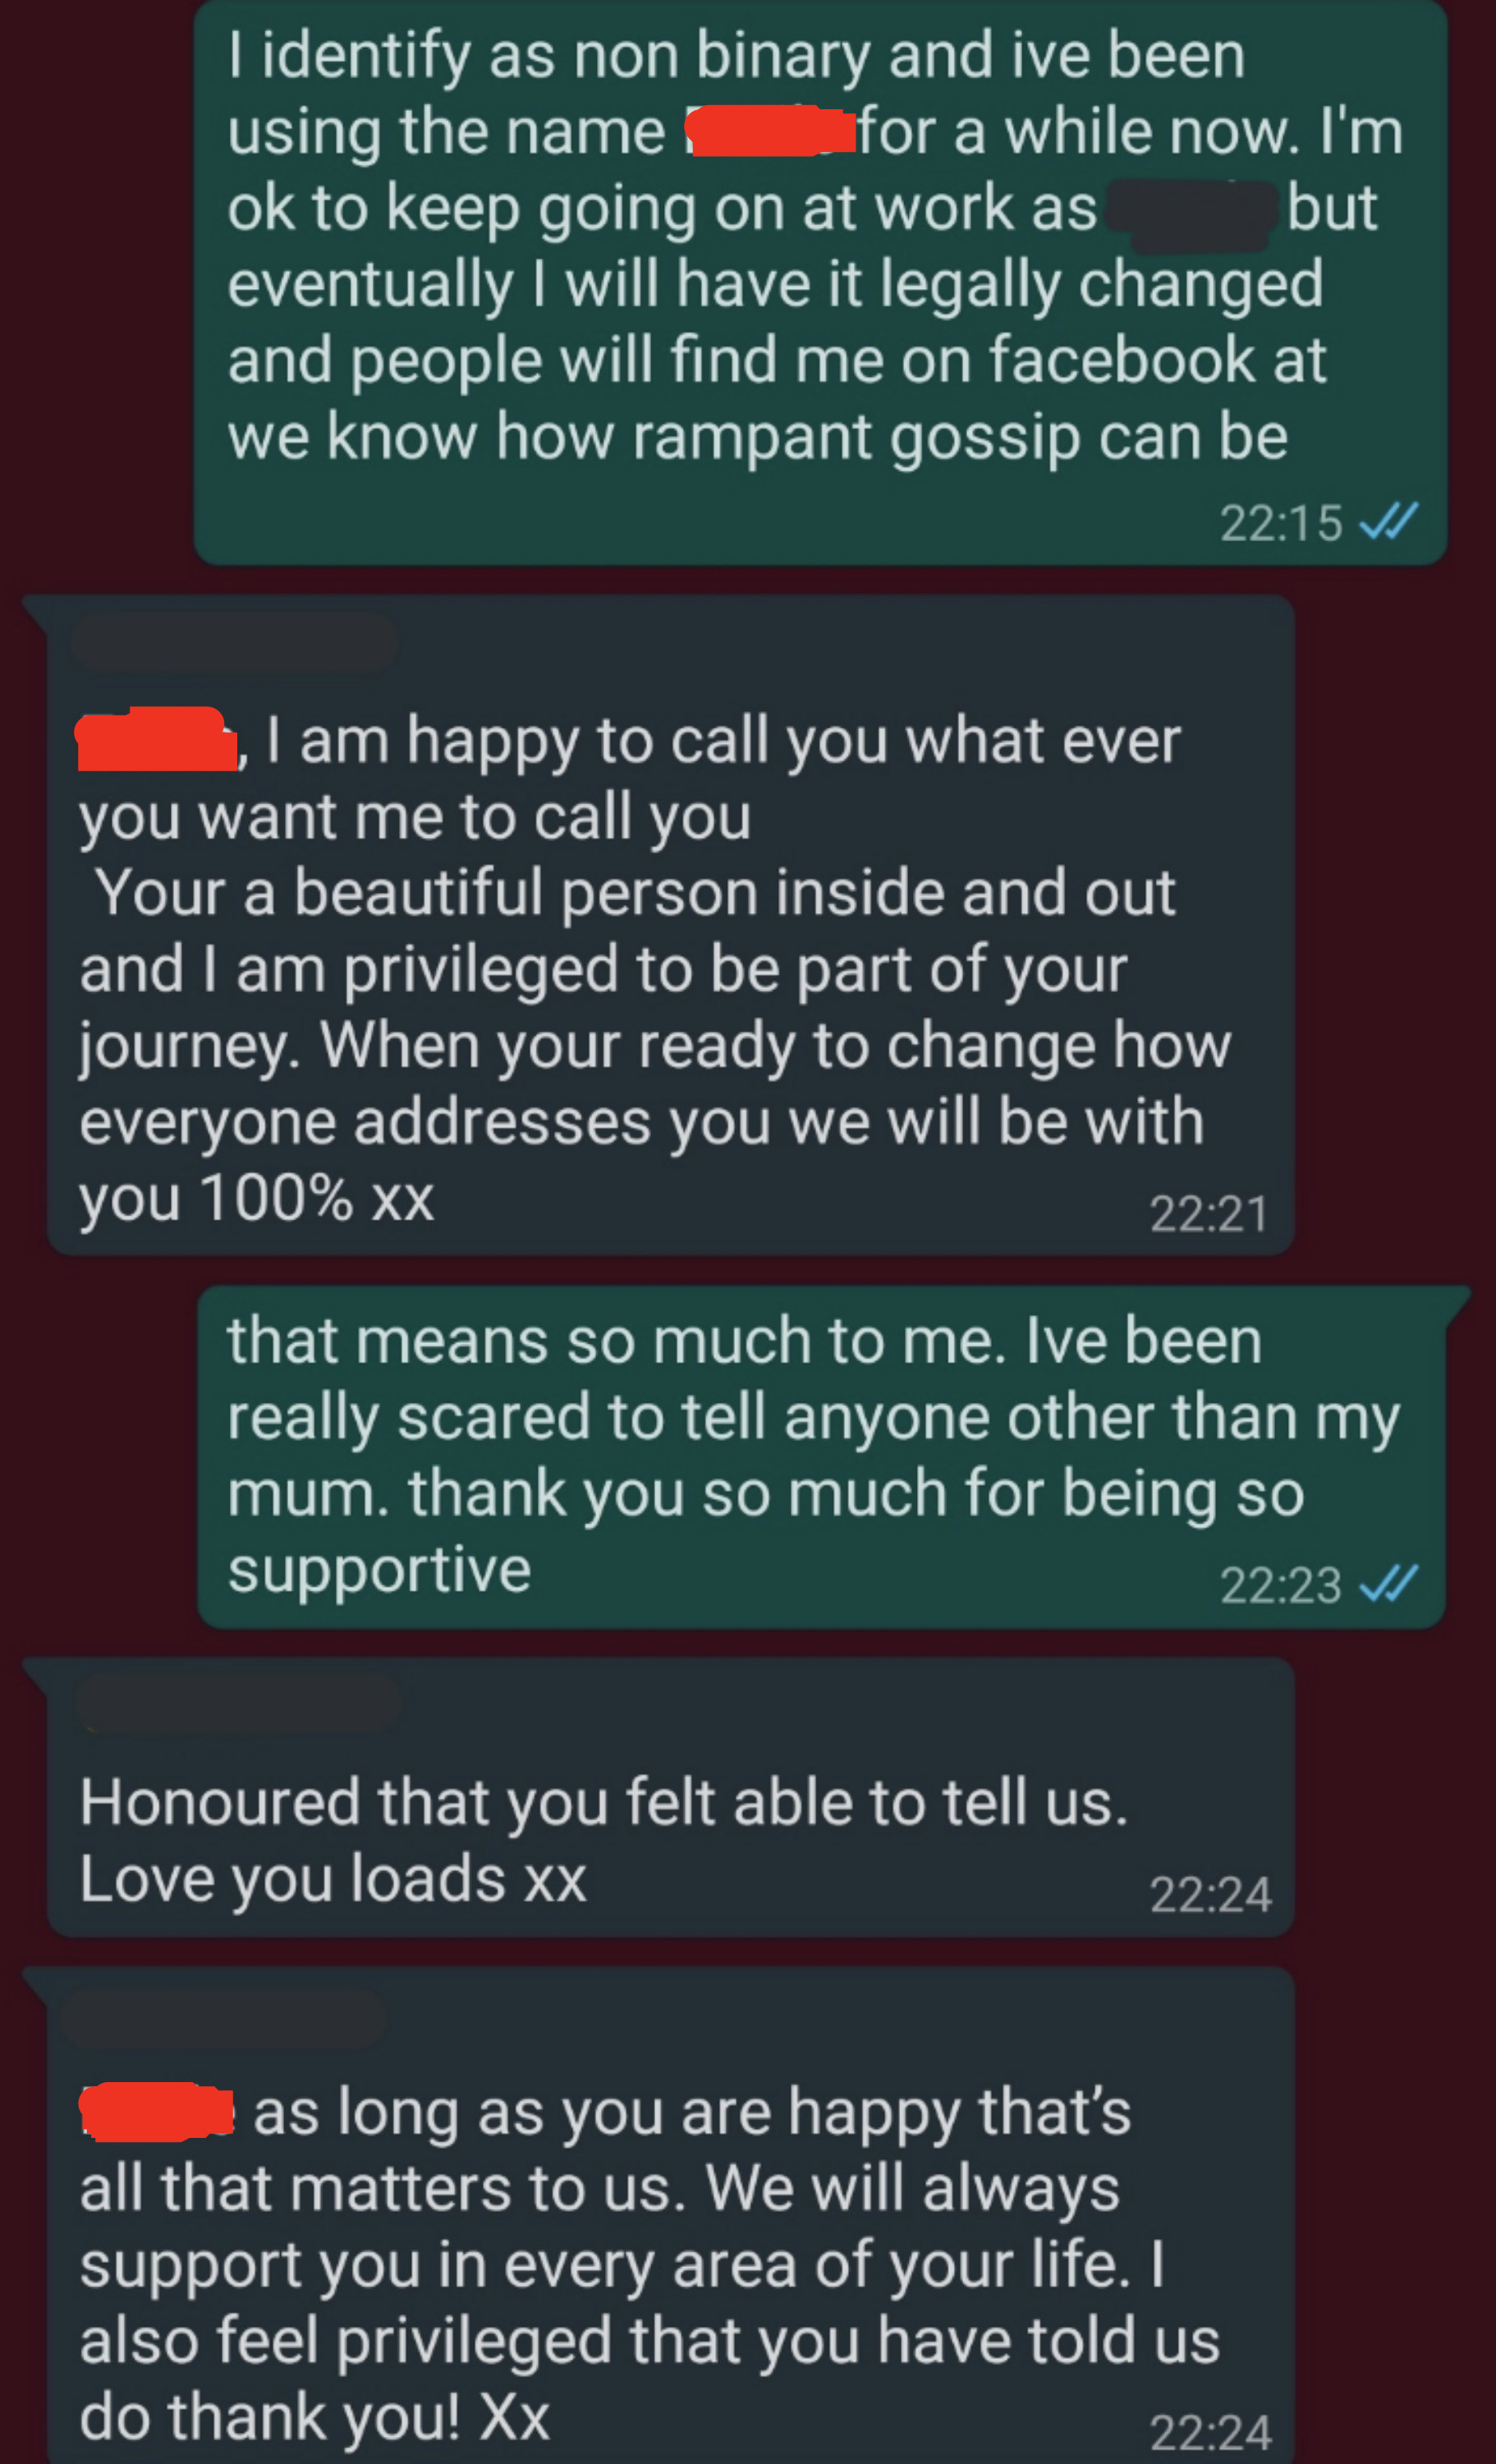 Boss supporting employee coming out as non-binary